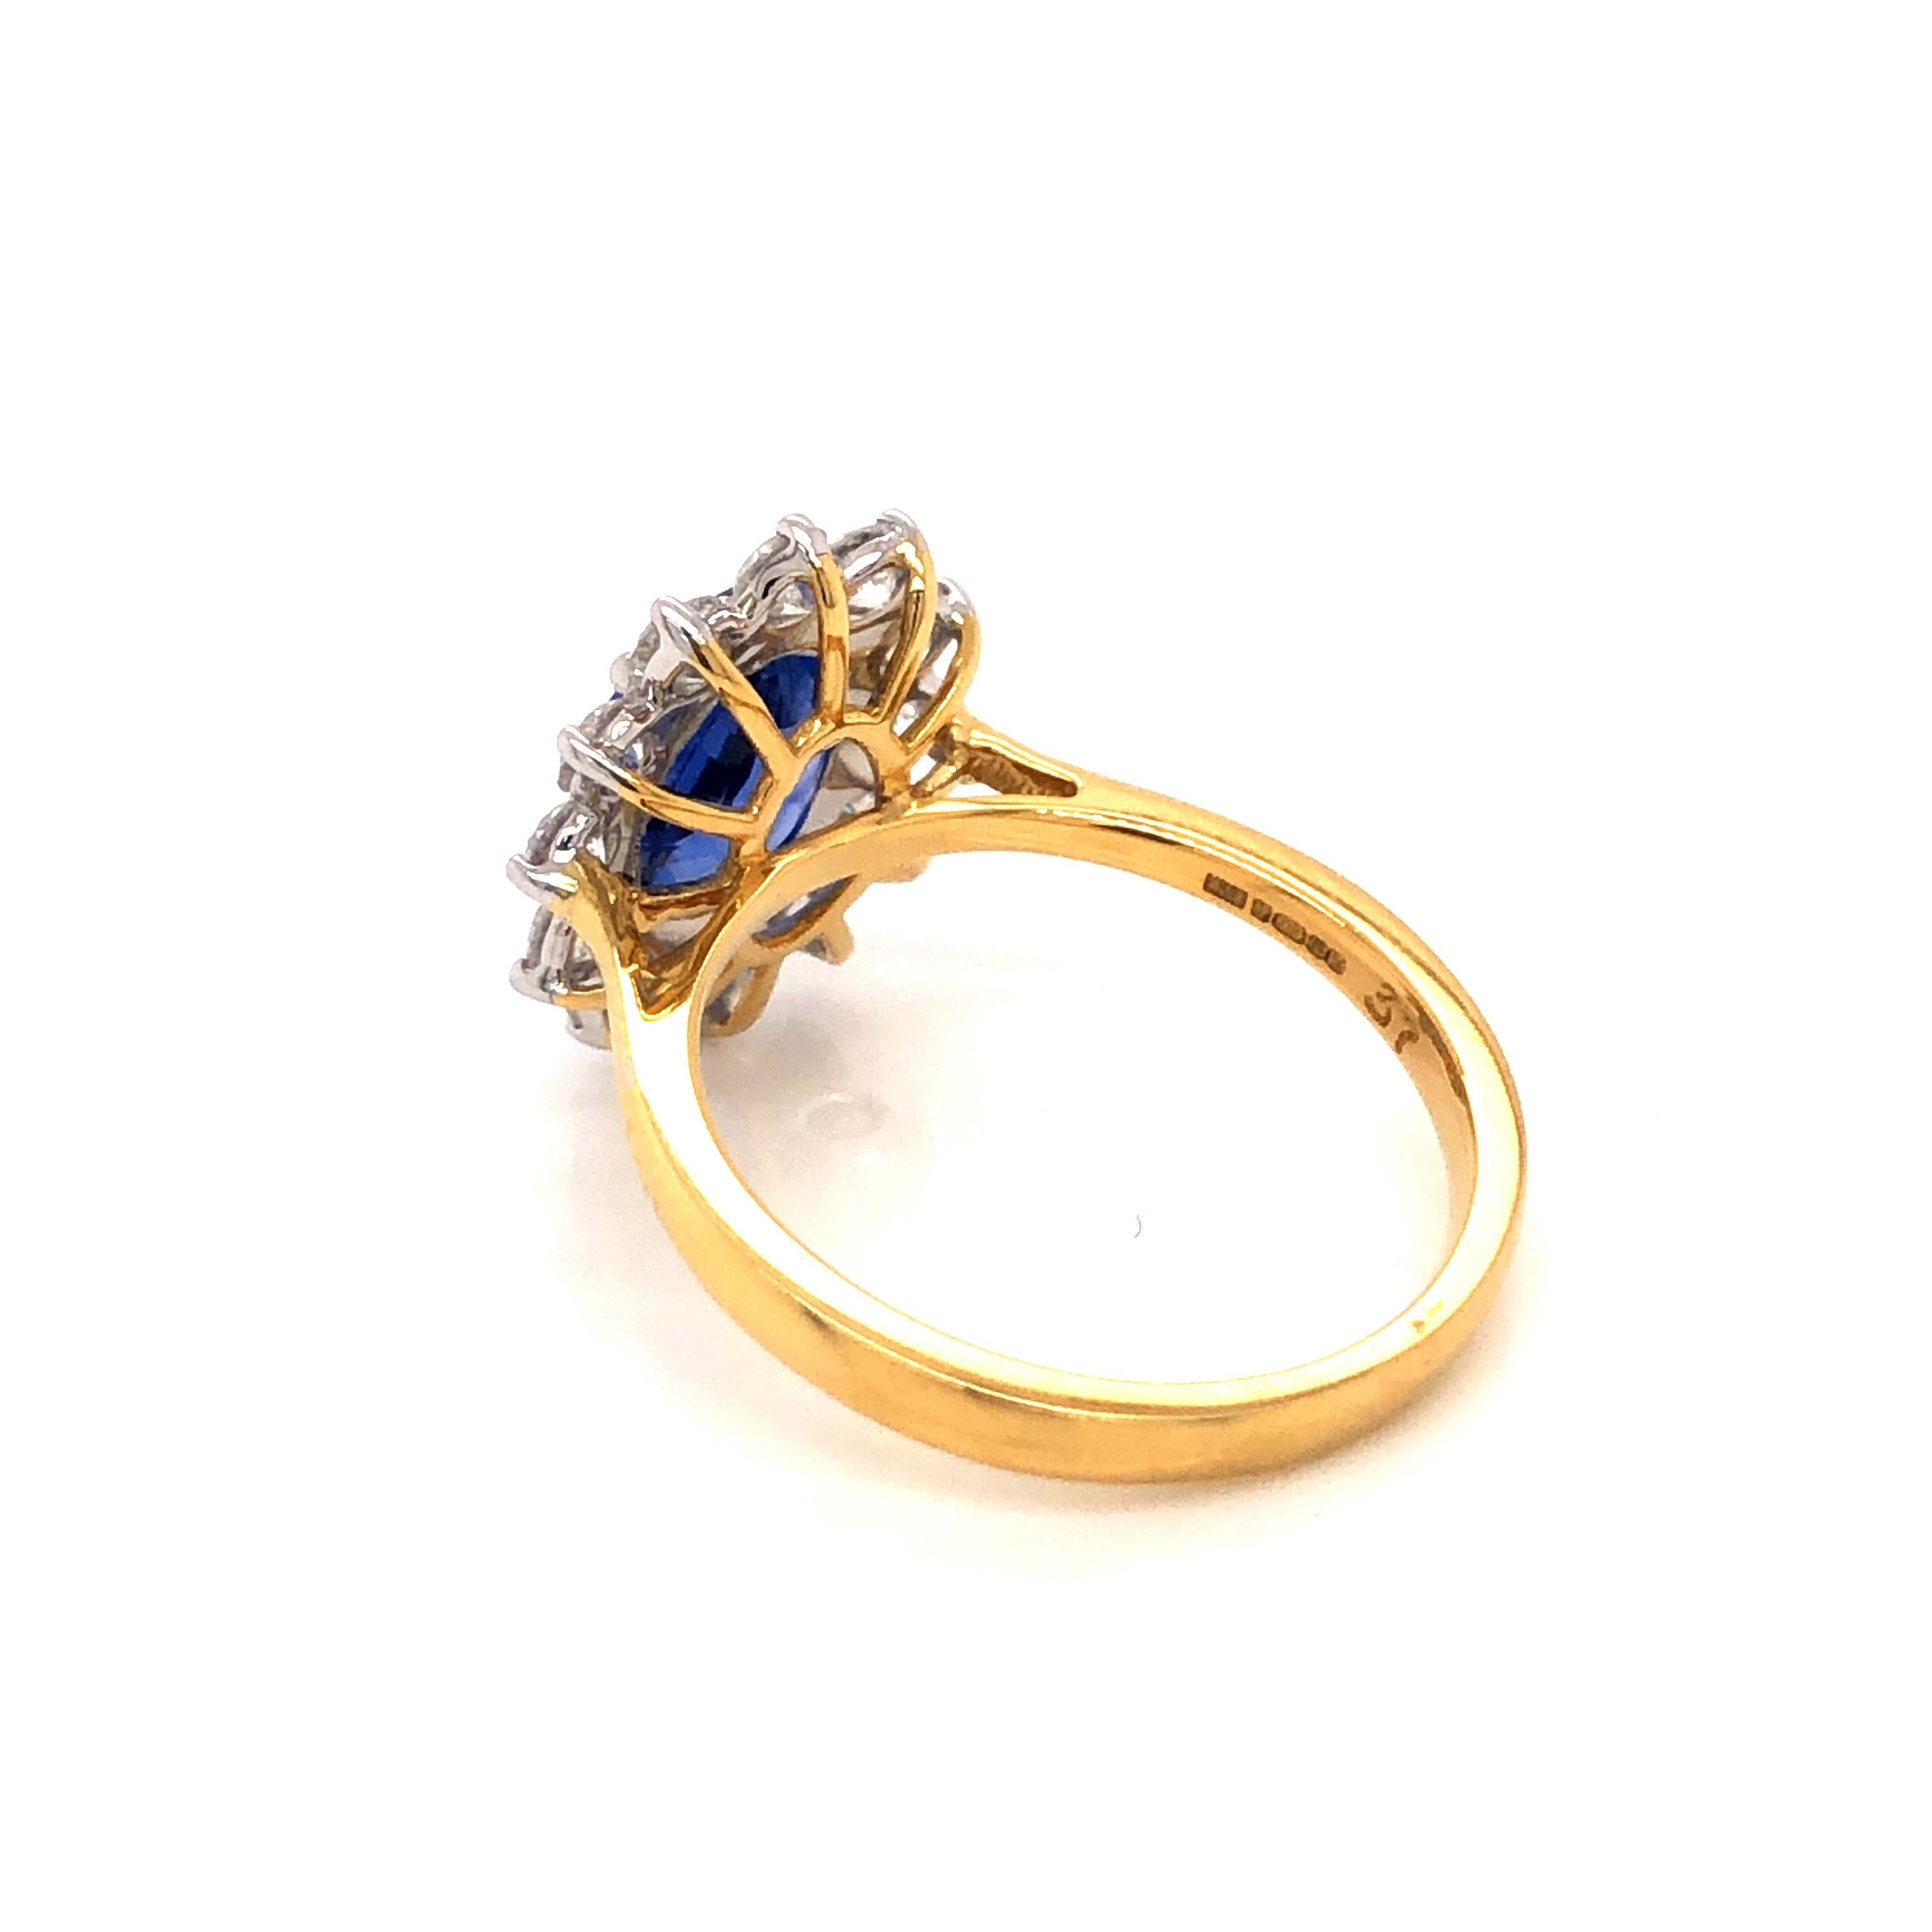 An impressive 3.46 carat total gem weight, 2.46  carat Blue Sapphire Dress / Engagement Ring surrounded by a claw set diamond halo With a total diamond weight of 0.99 carat white colour G, clarity VS / SI round brilliant cut diamonds. 

This Ring